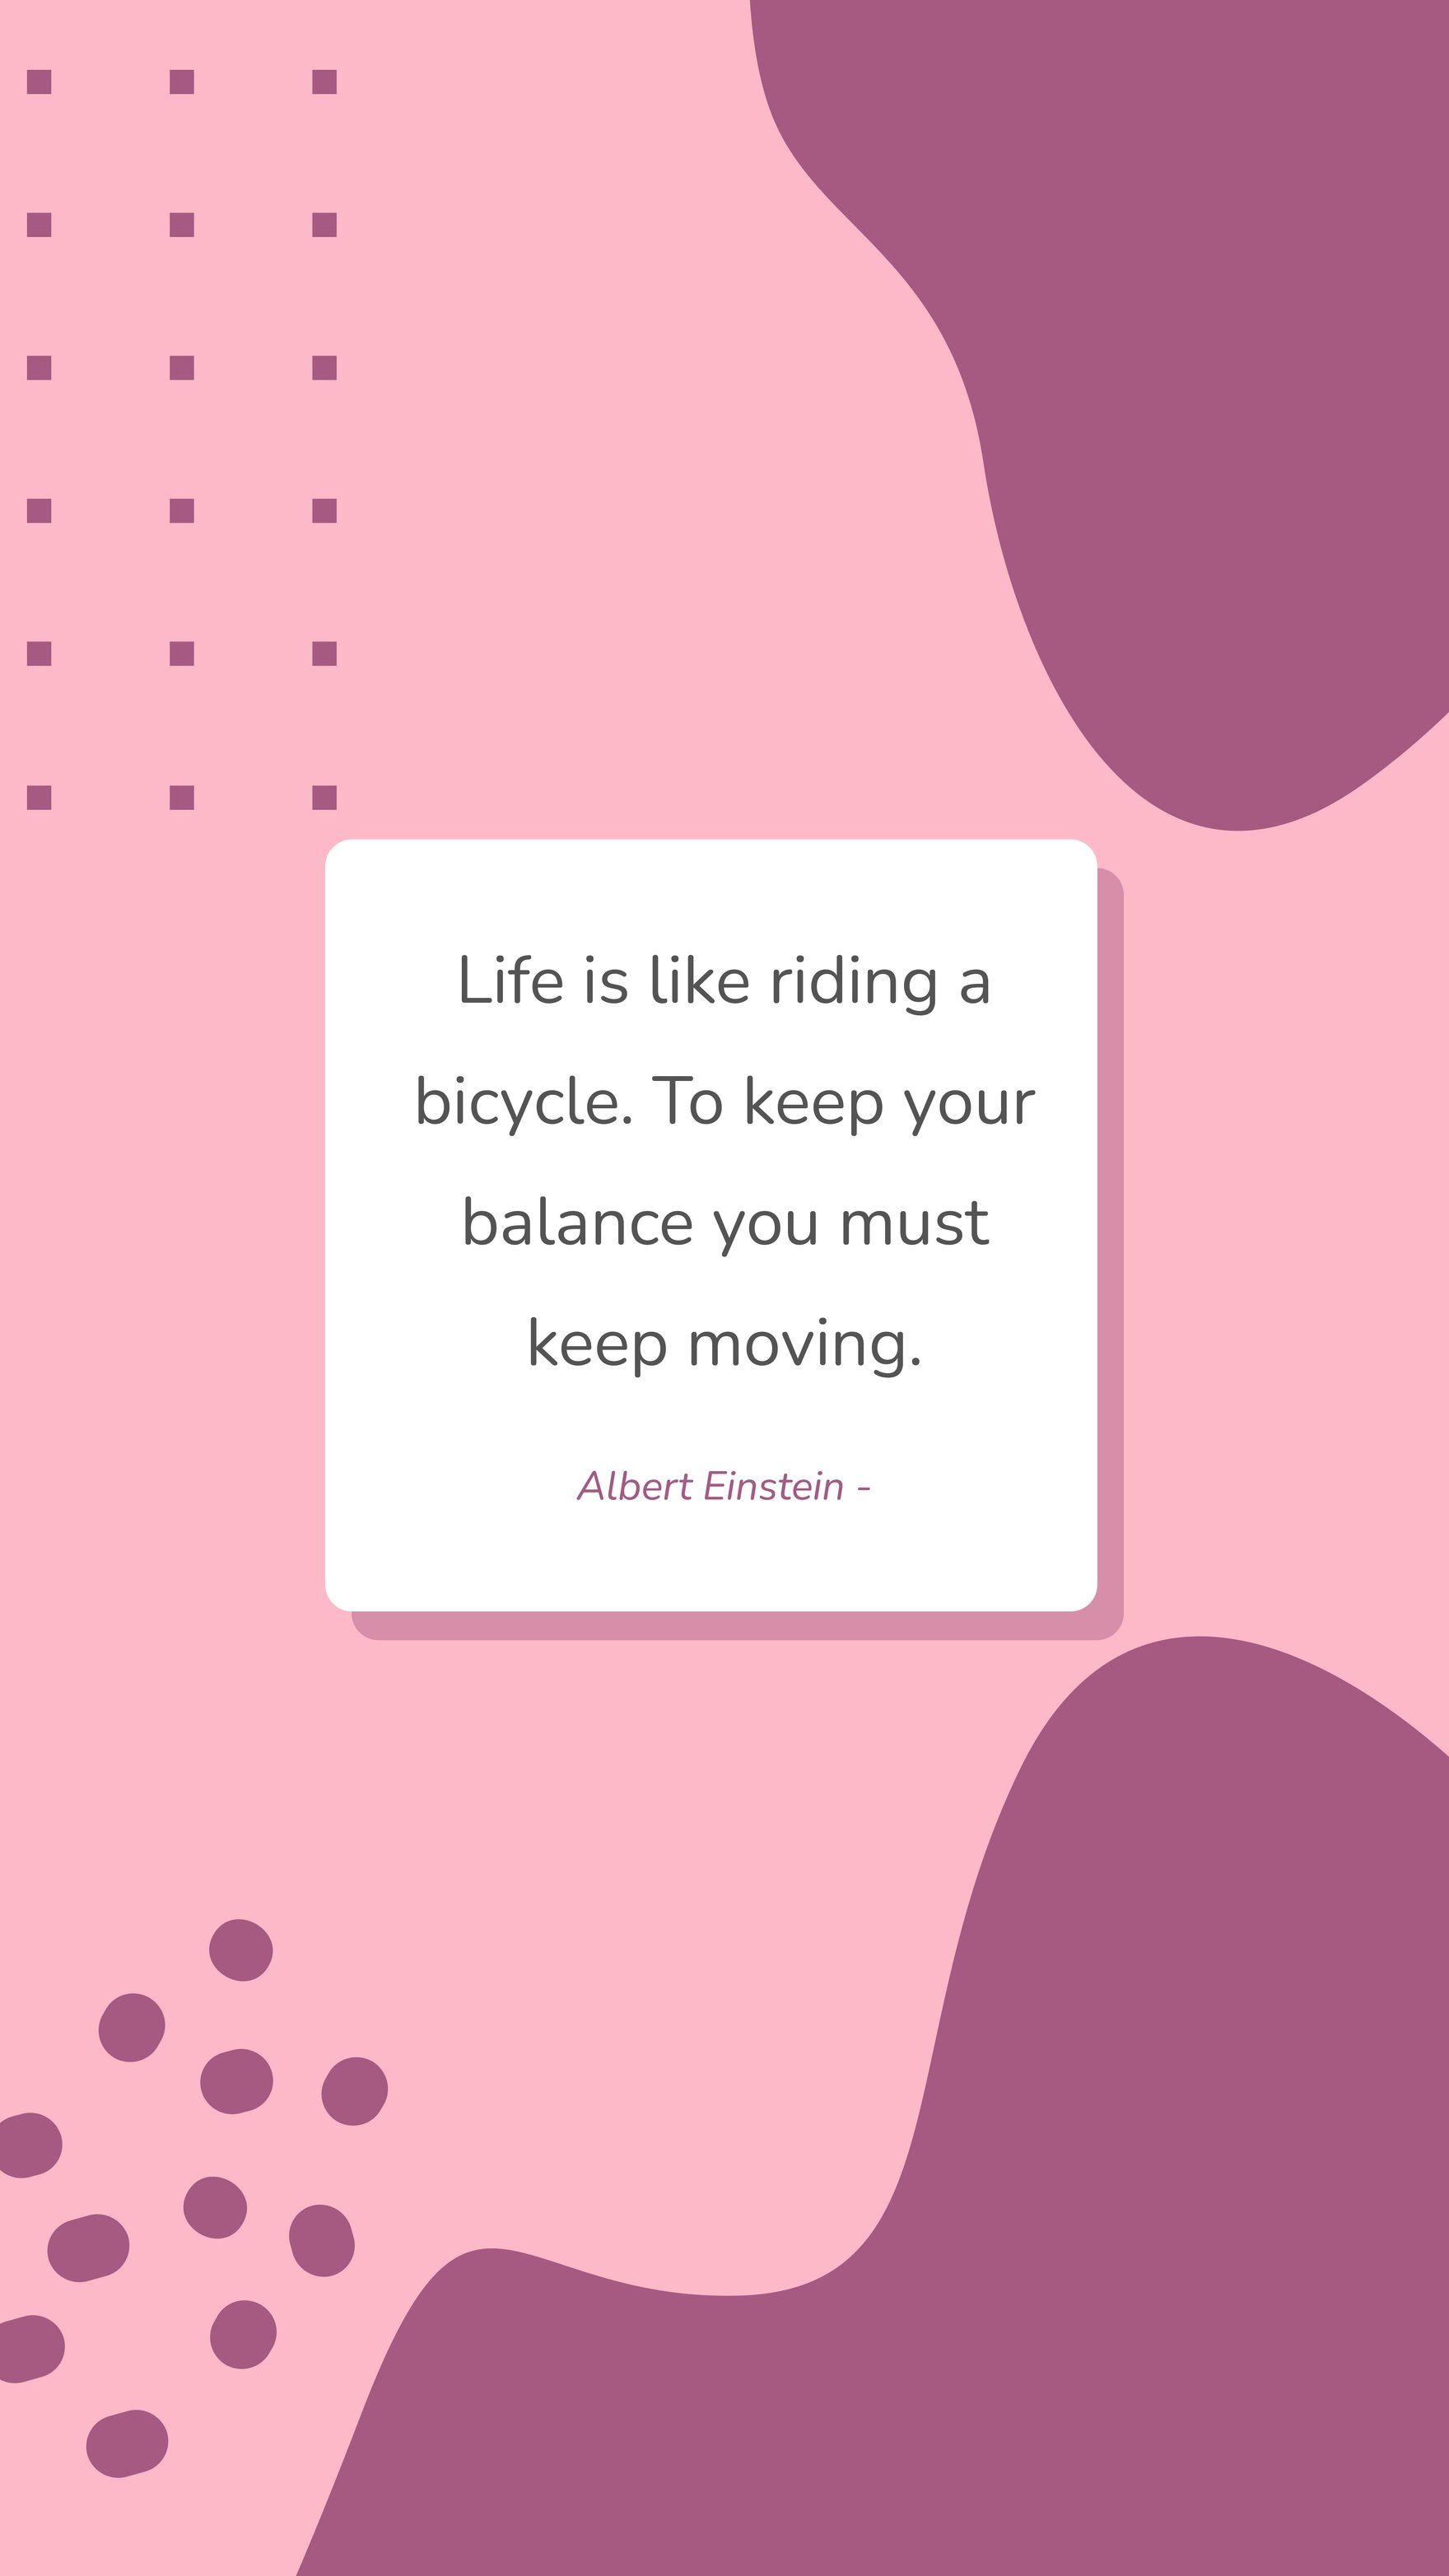 Albert Einstein - Life is like riding a bicycle. To keep your balance you must keep moving.